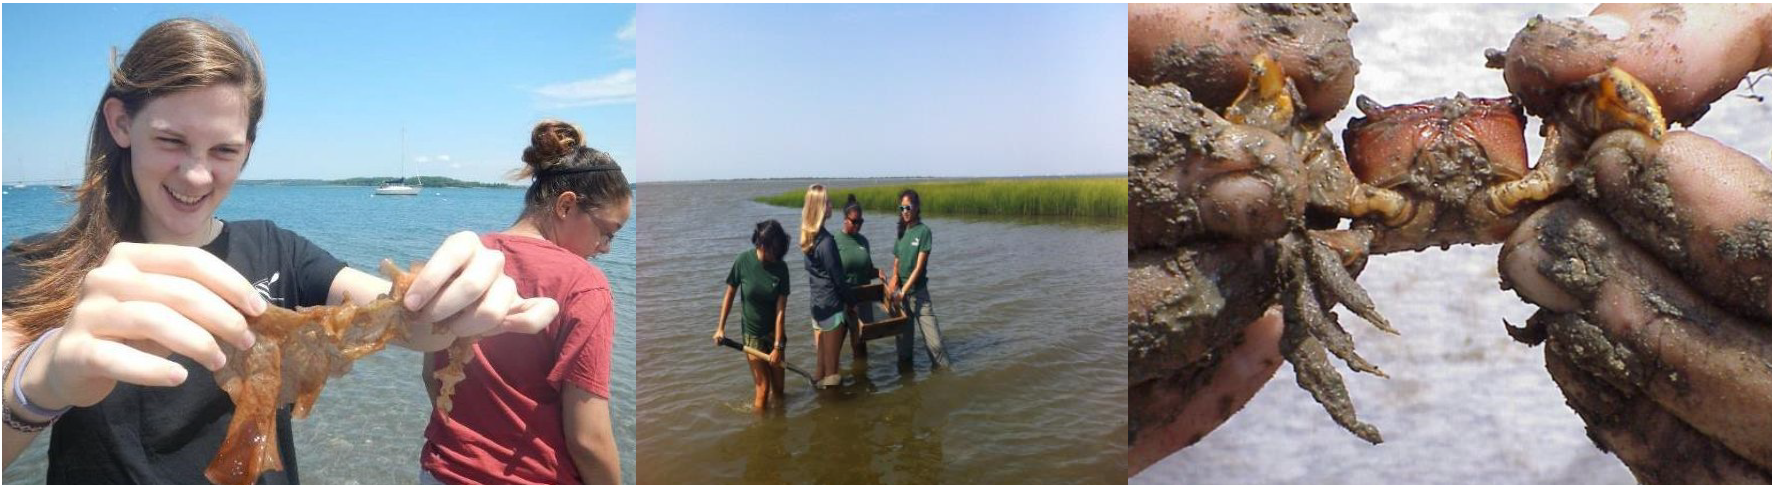 Each year students were introduced to coastal ecology by exploring the Eastern Shore. Working as scientists in the field, they seined the Bay at low tide, did beach transects, and got very muddy.